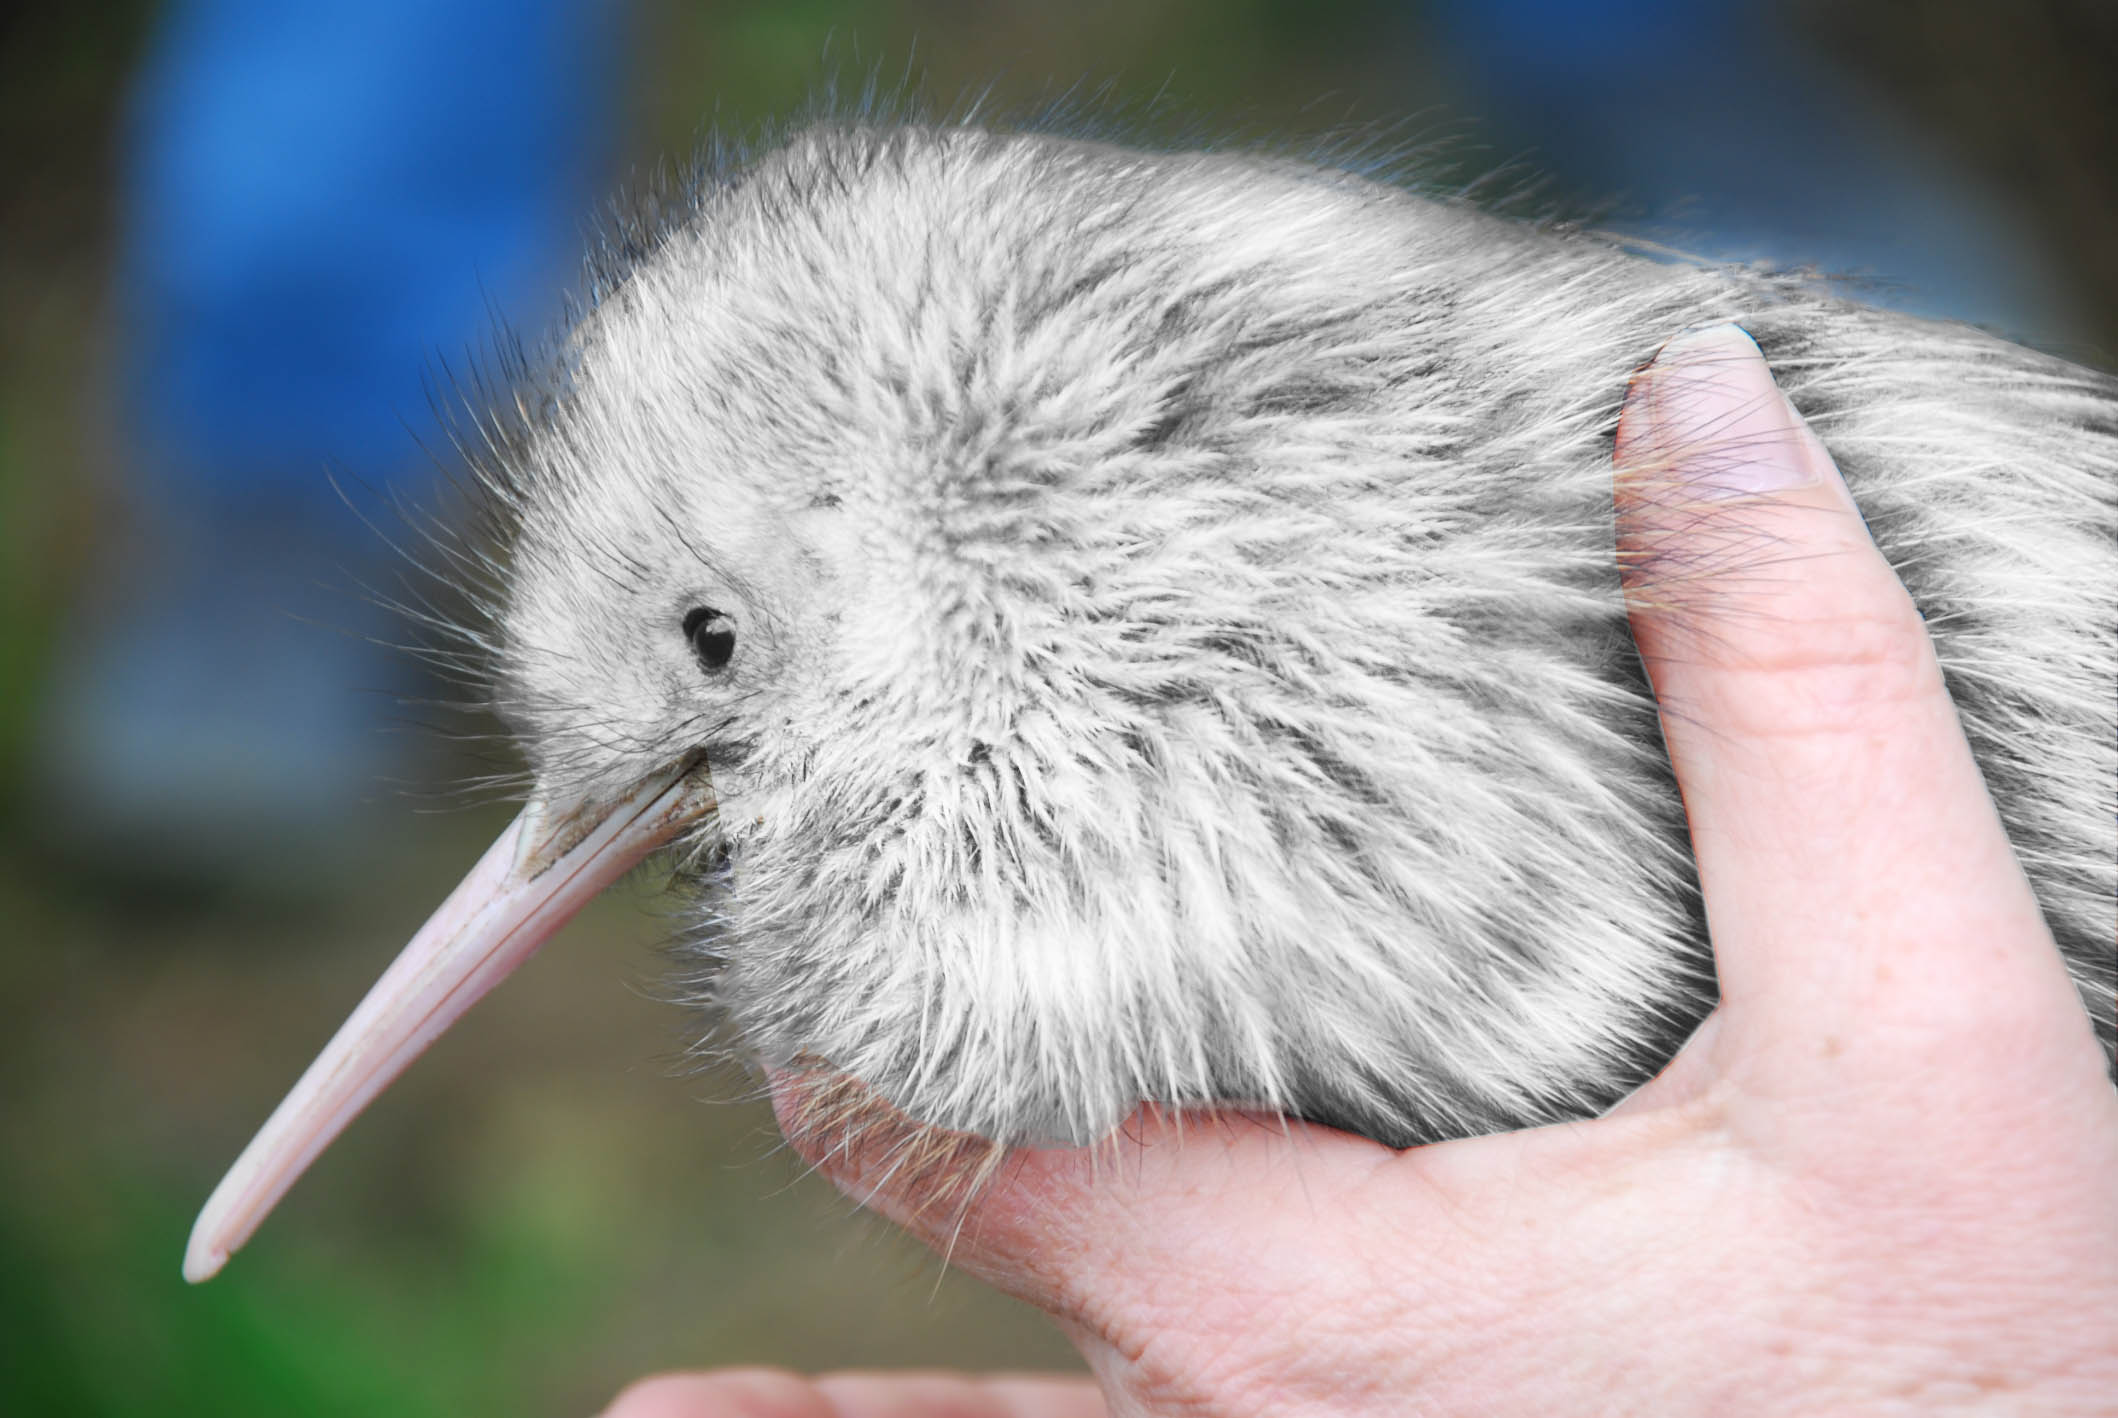 Kiwi locums are atwitter over their fair-feathered friend